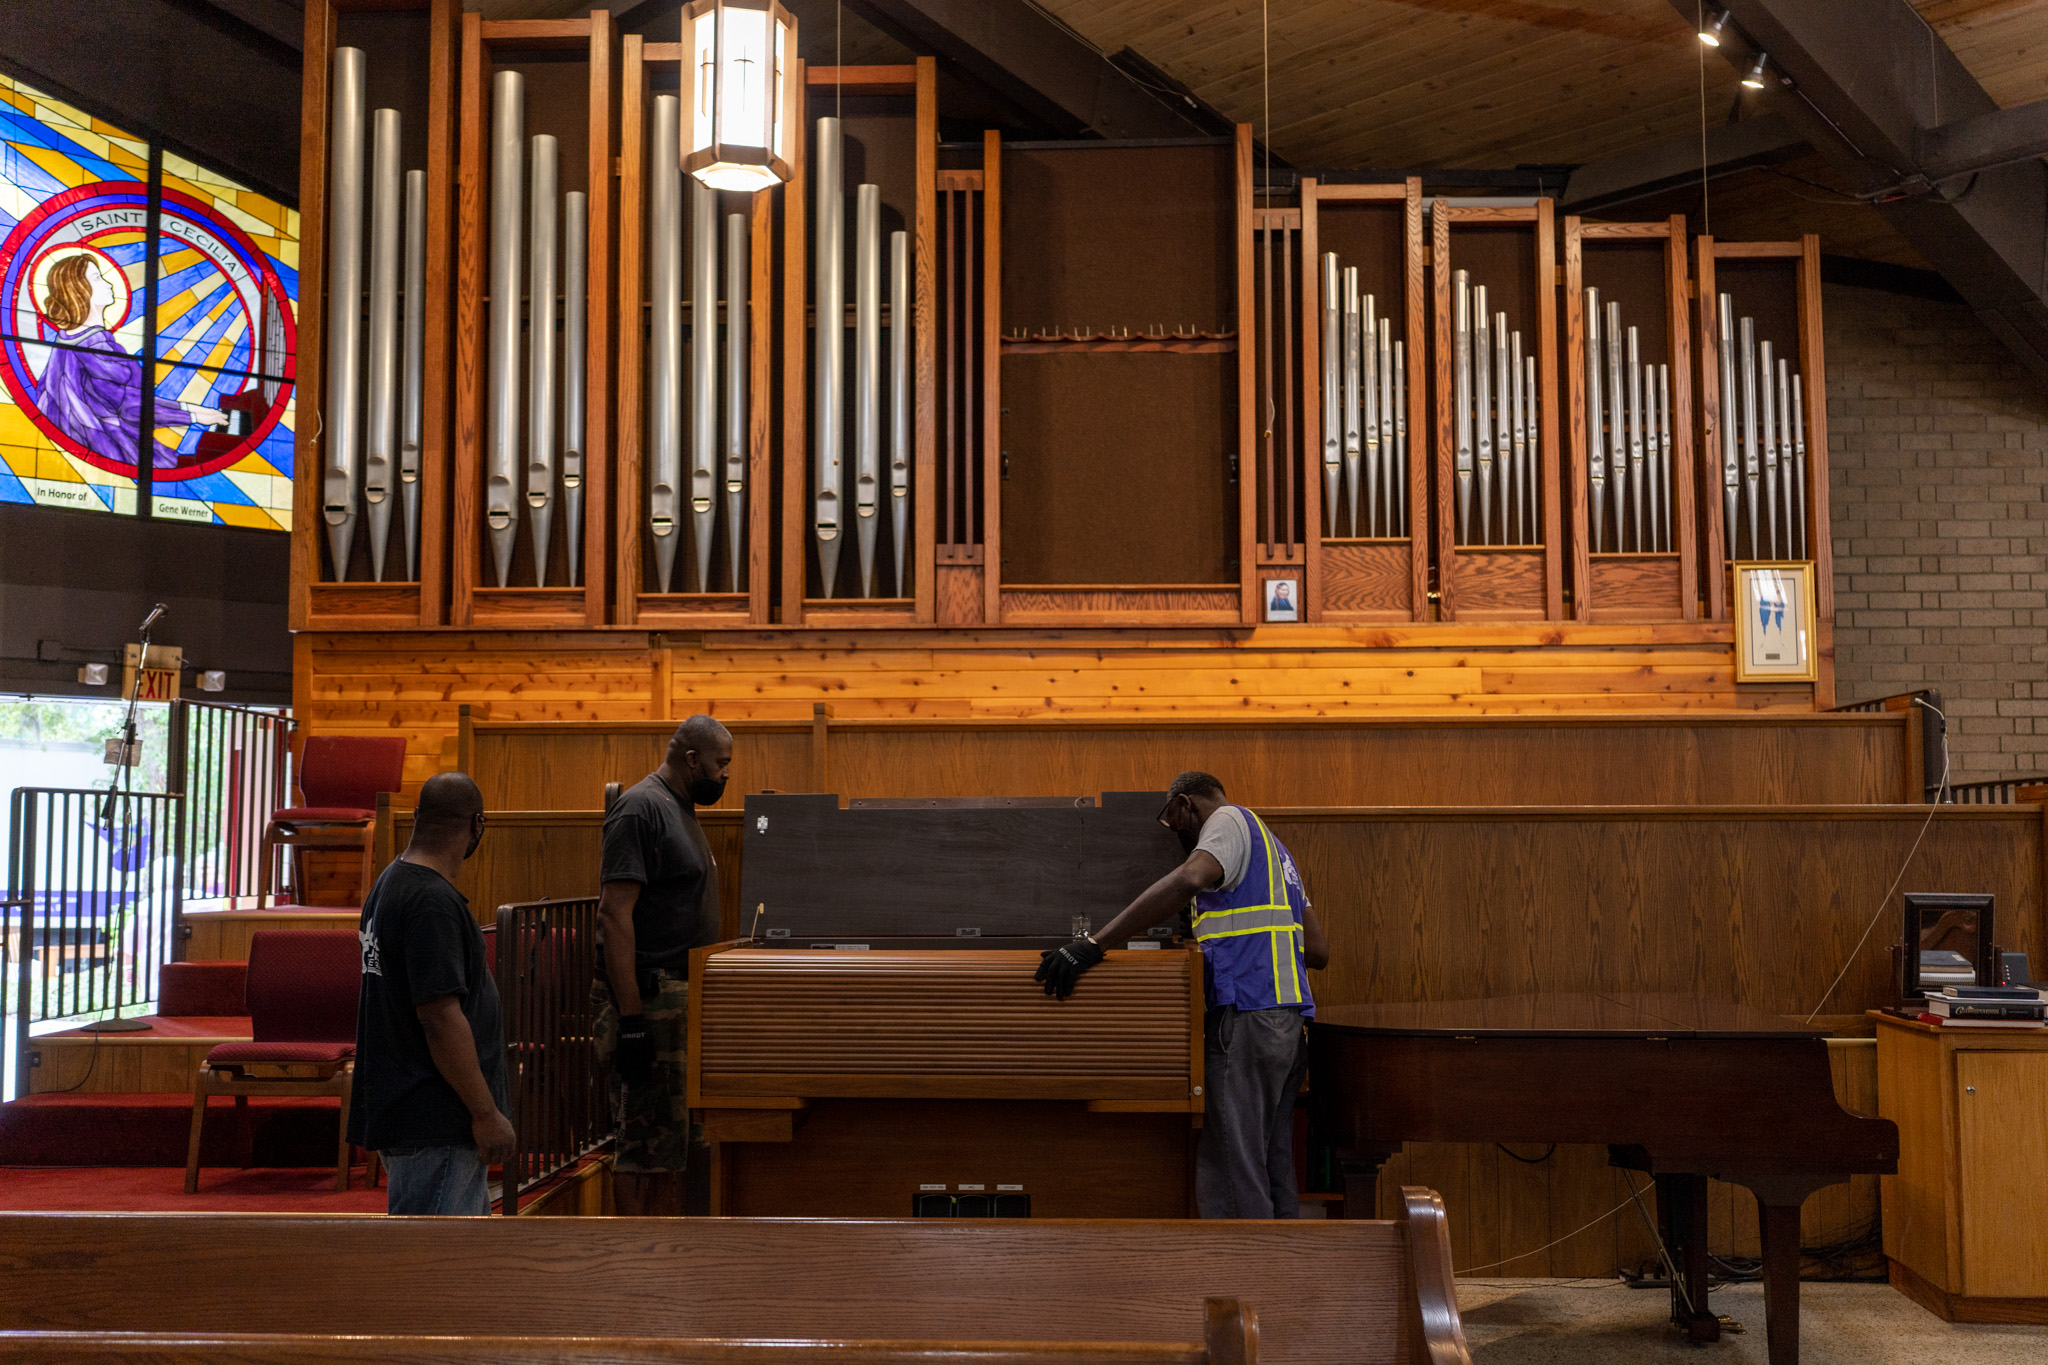 Removal of the Old Organ